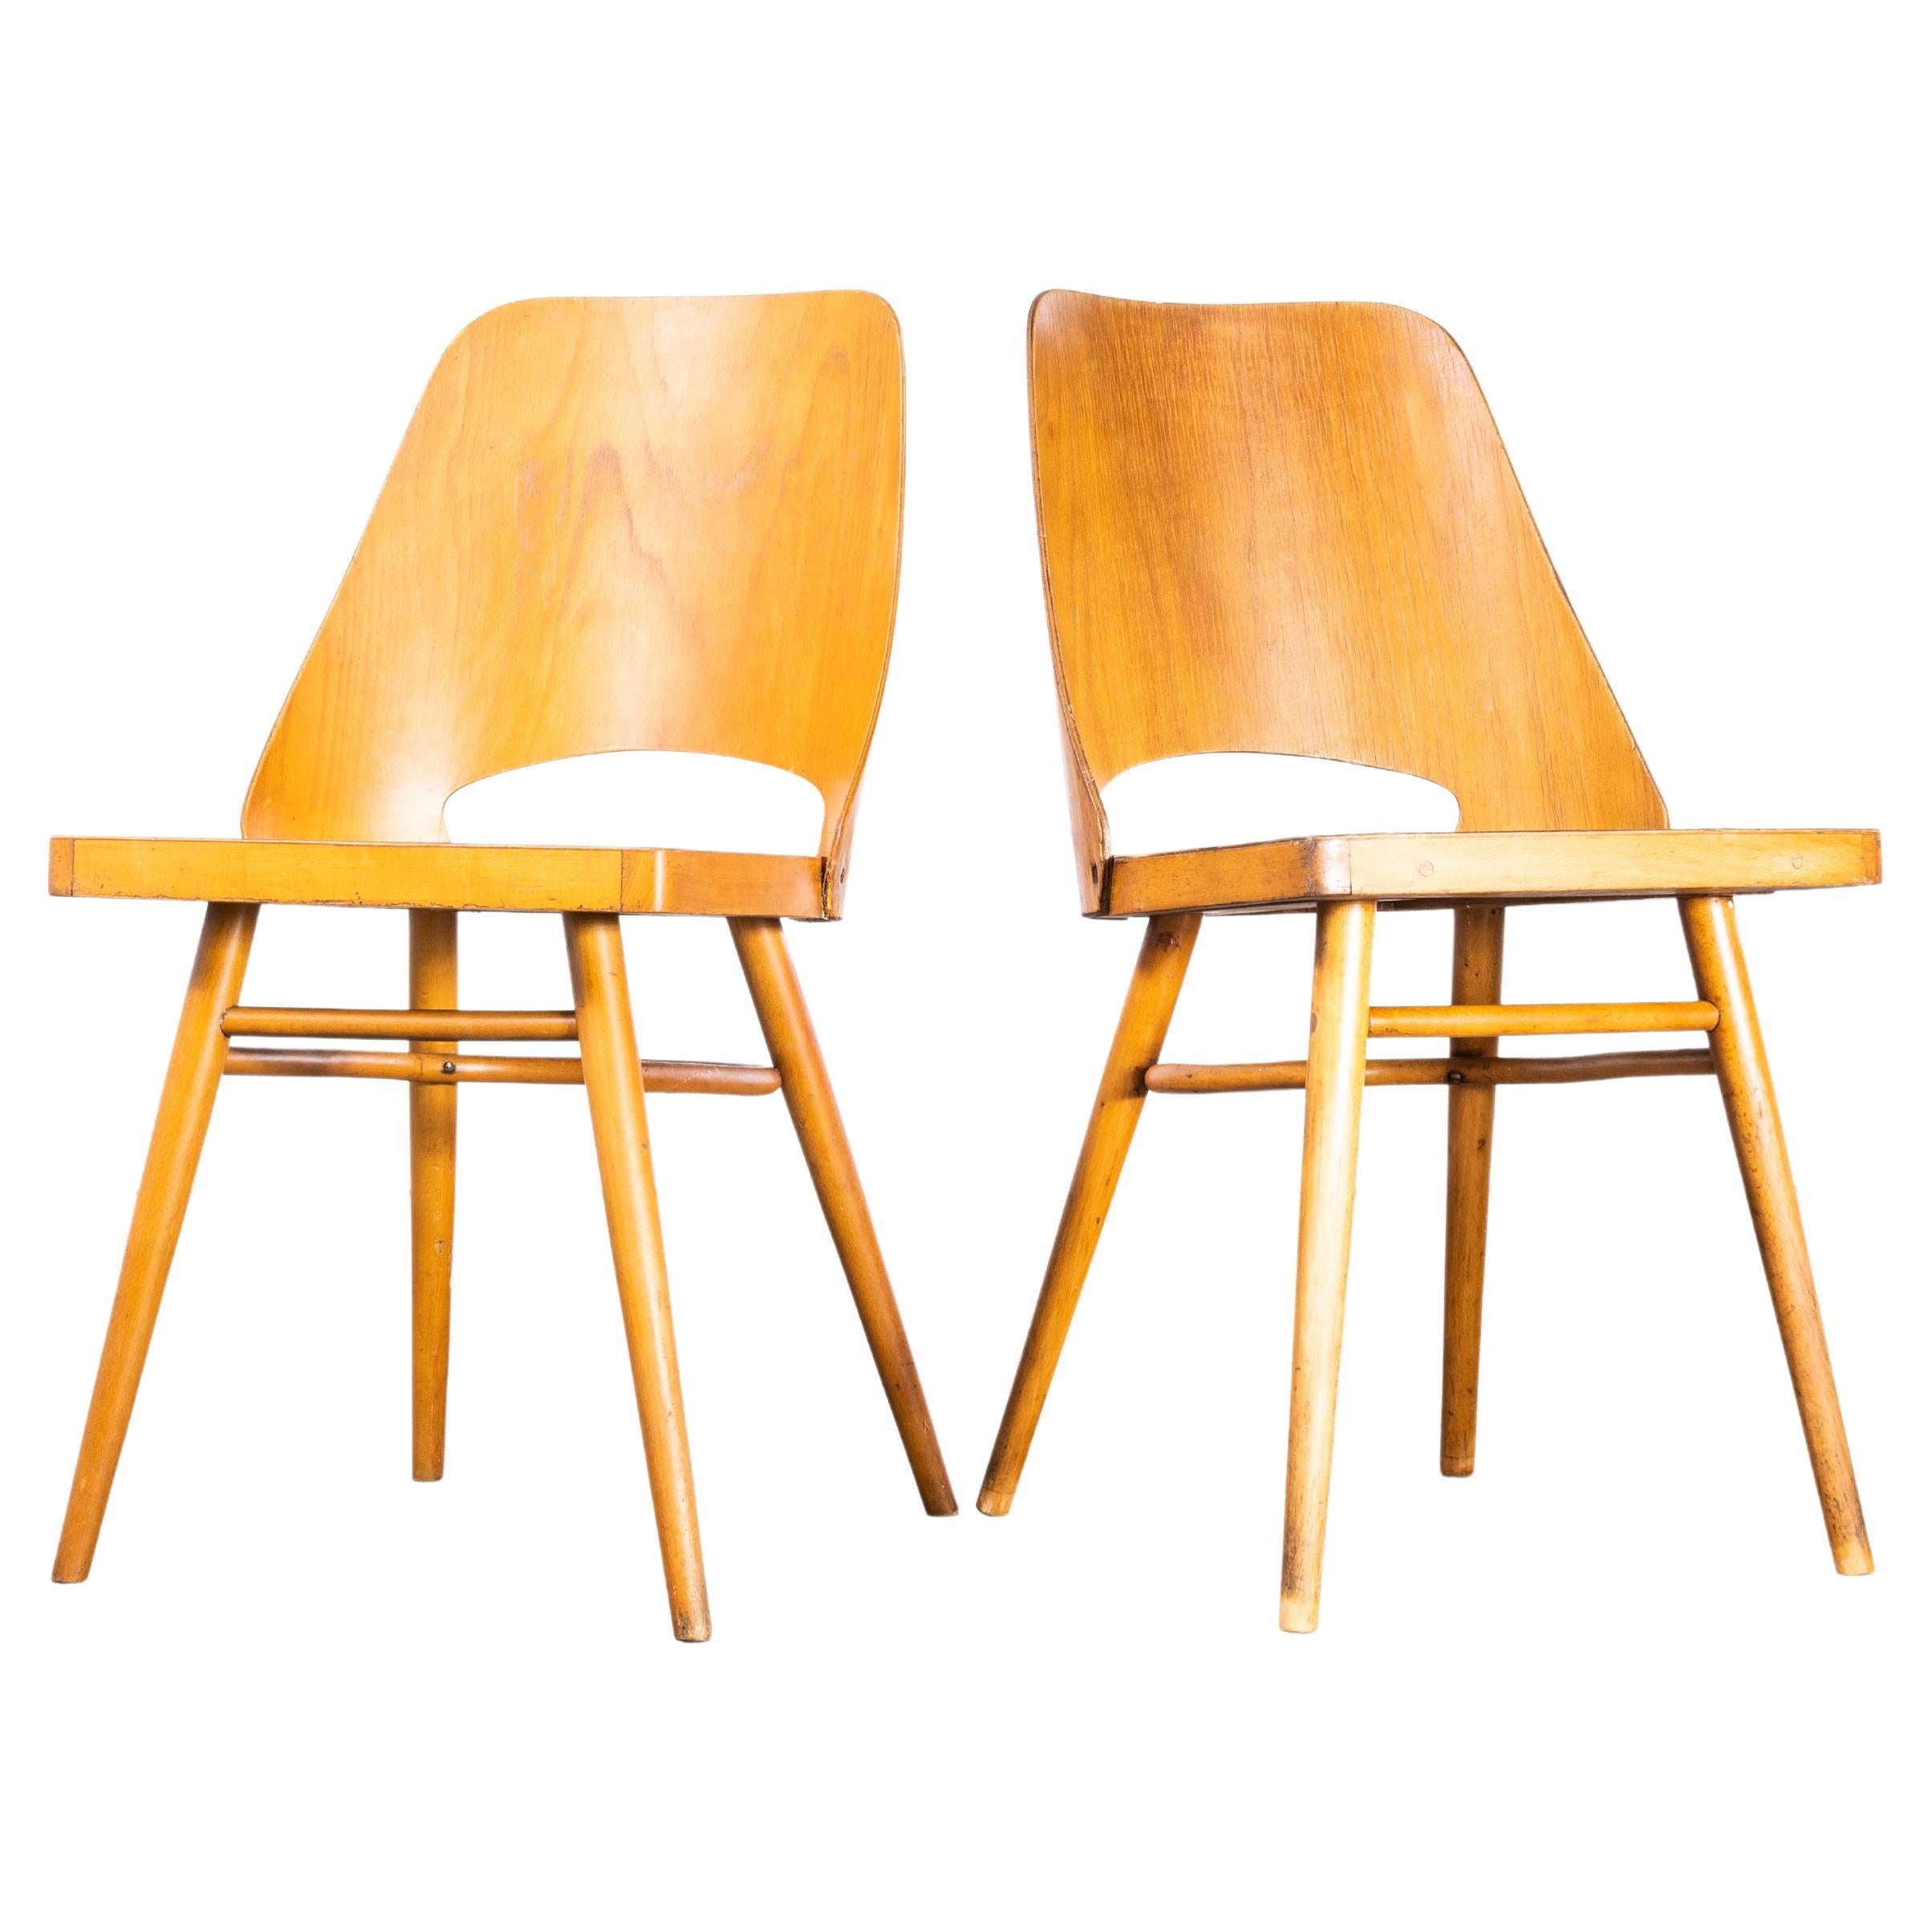 1950's Honey Beech Dining Chairs By Radomir Hoffman For Ton - Pair